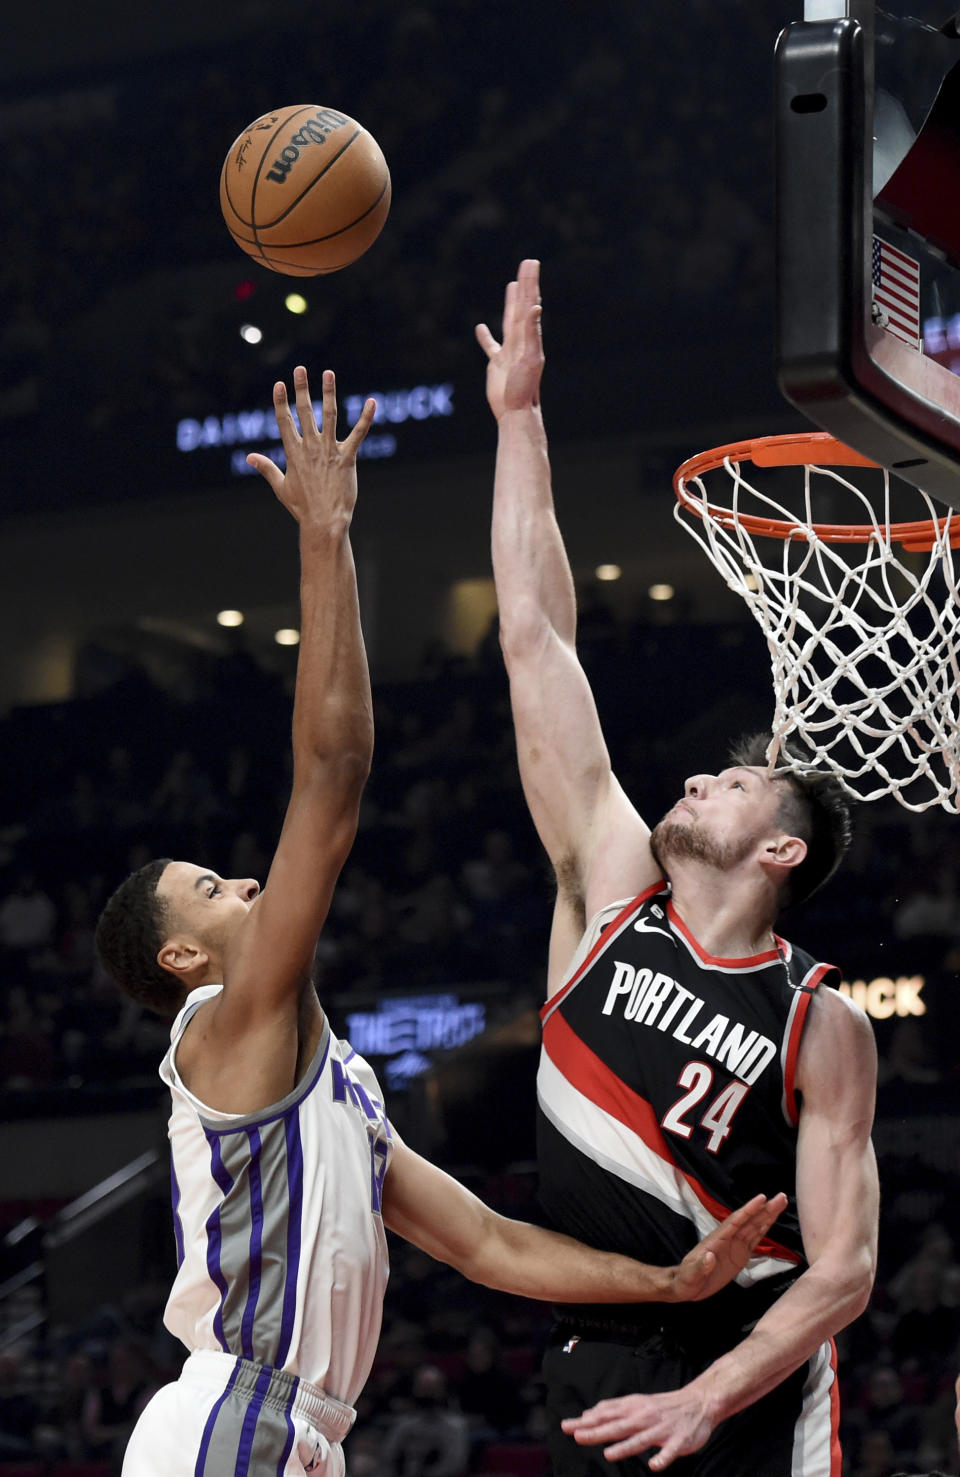 Sacramento Kings forward Keegan Murray, left, drives to the basket against Portland Trail Blazers forward Drew Eubanks, right, during the first half of an NBA basketball game in Portland, Ore., Friday, March 31, 2023. (AP Photo/Steve Dykes)